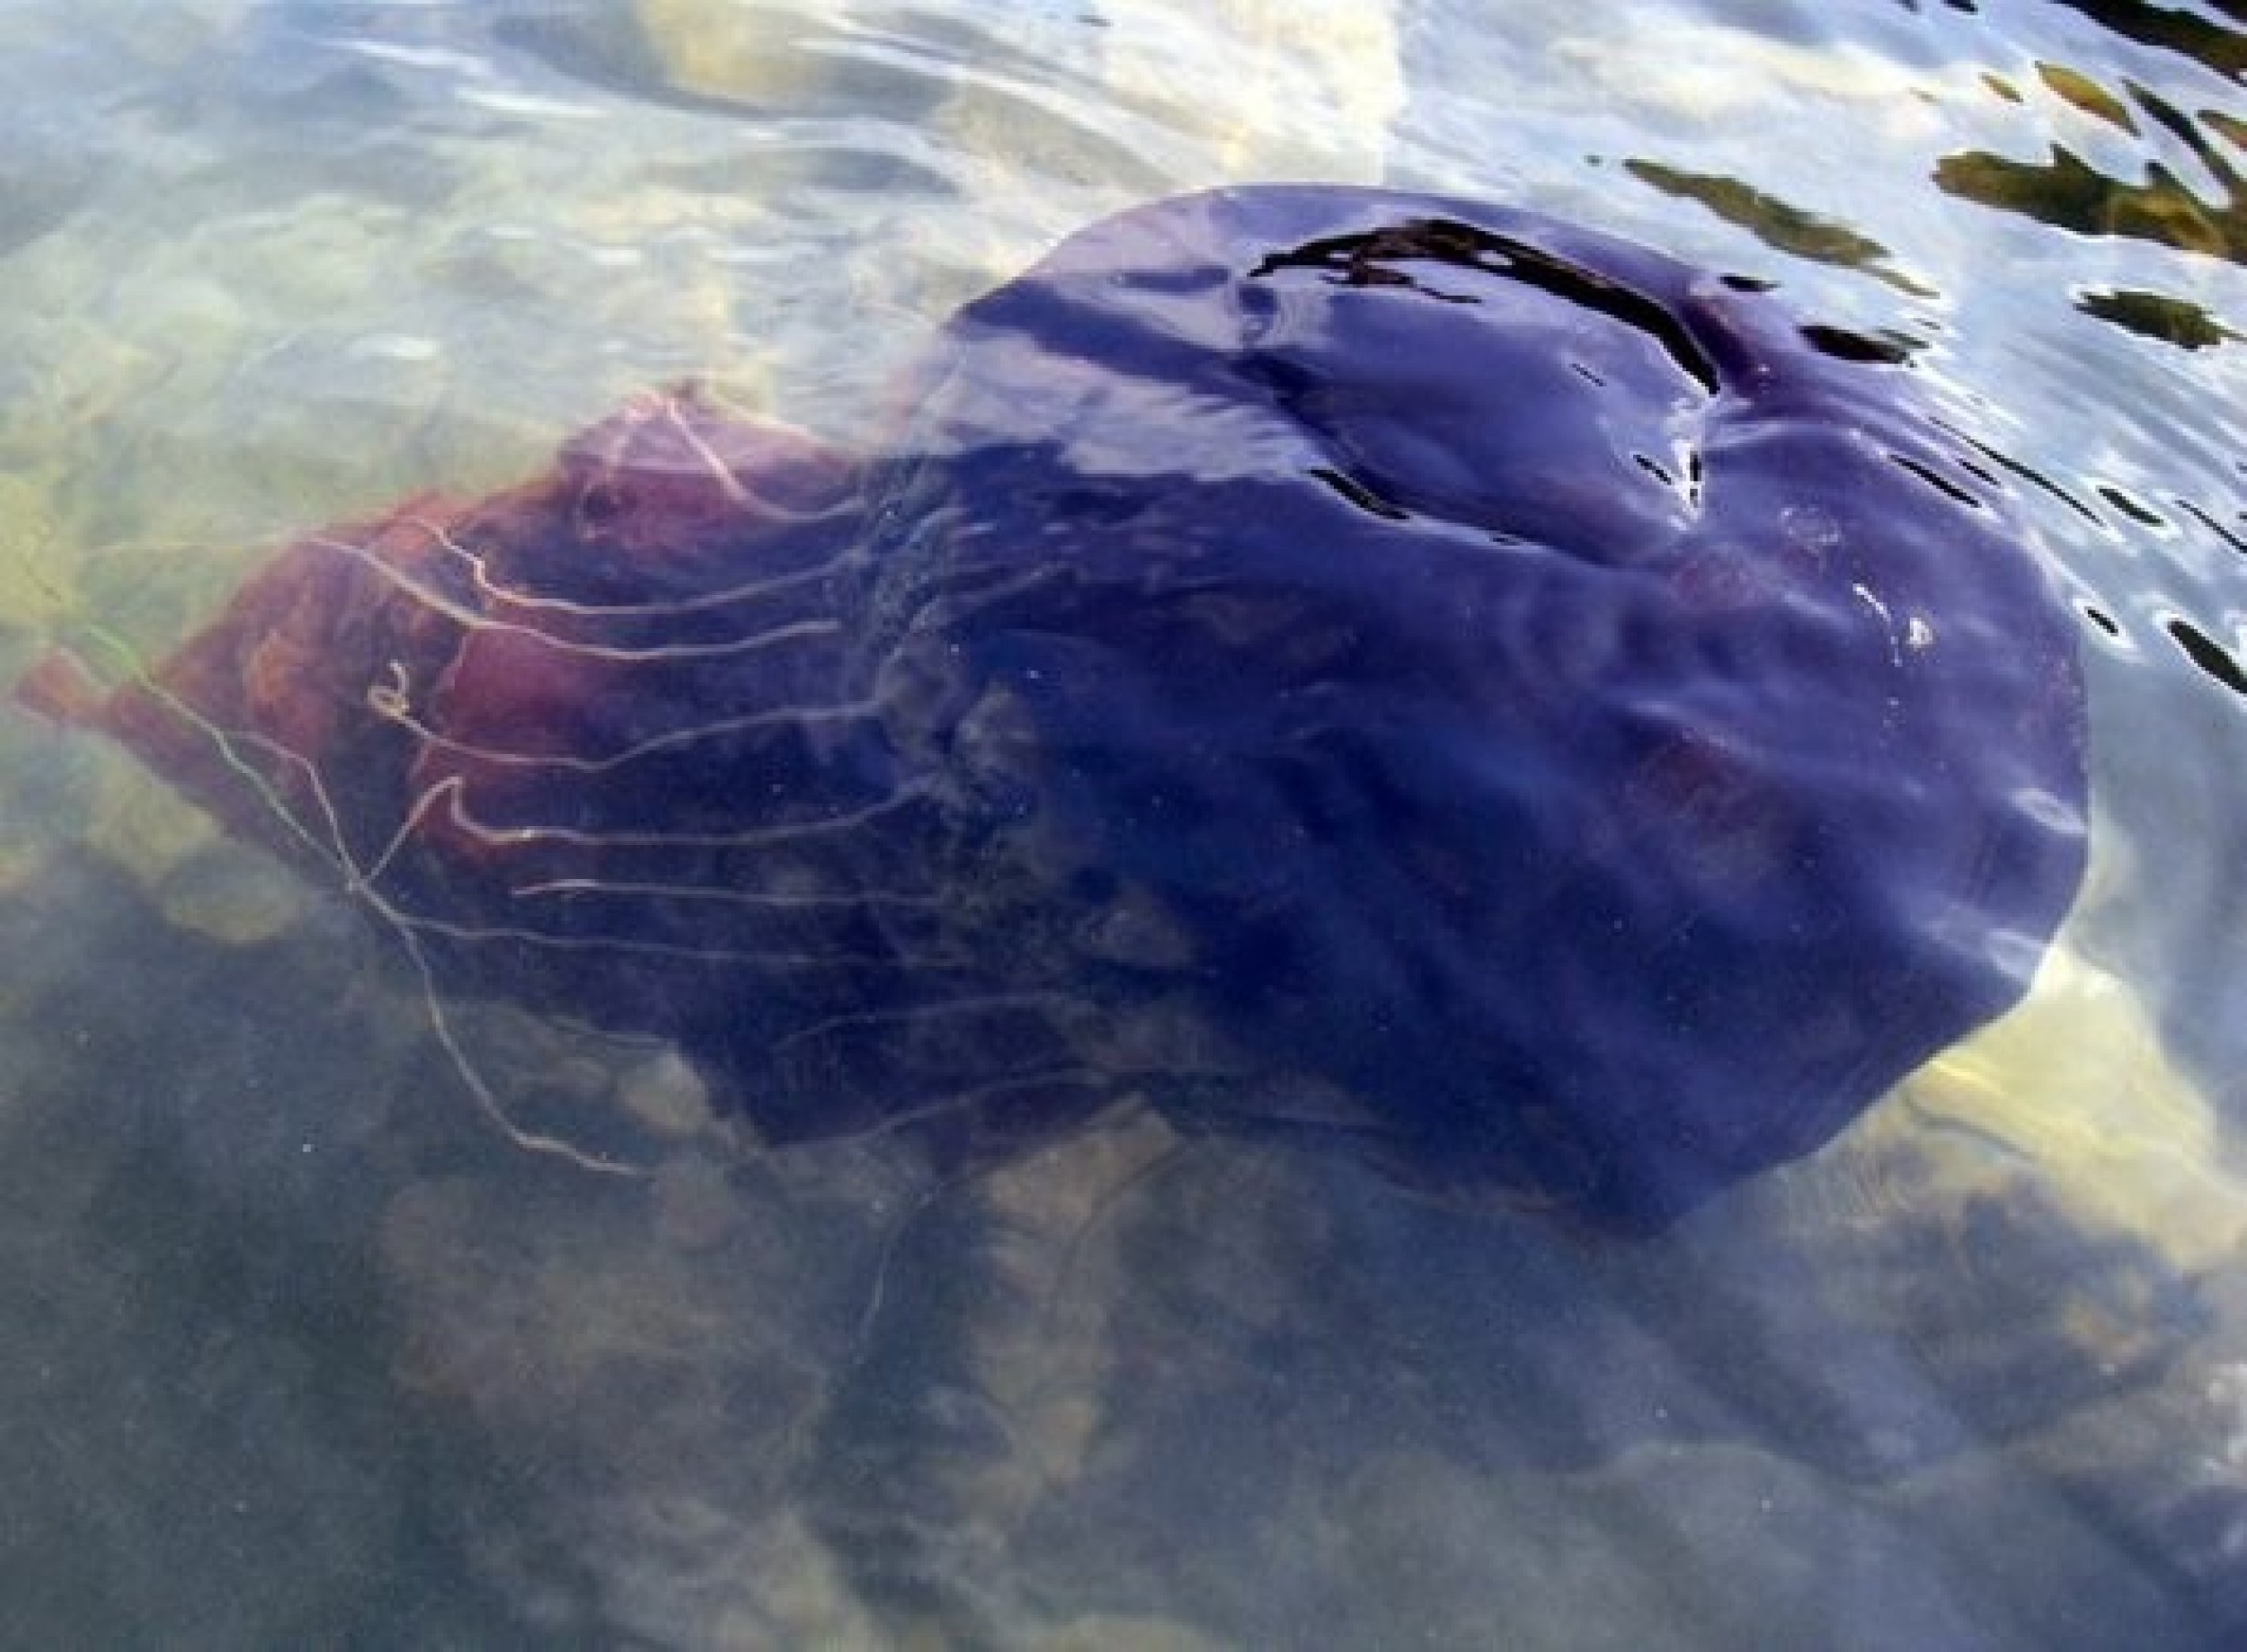 In July last year, floating black jellyfish were spotted in San Diego Bay